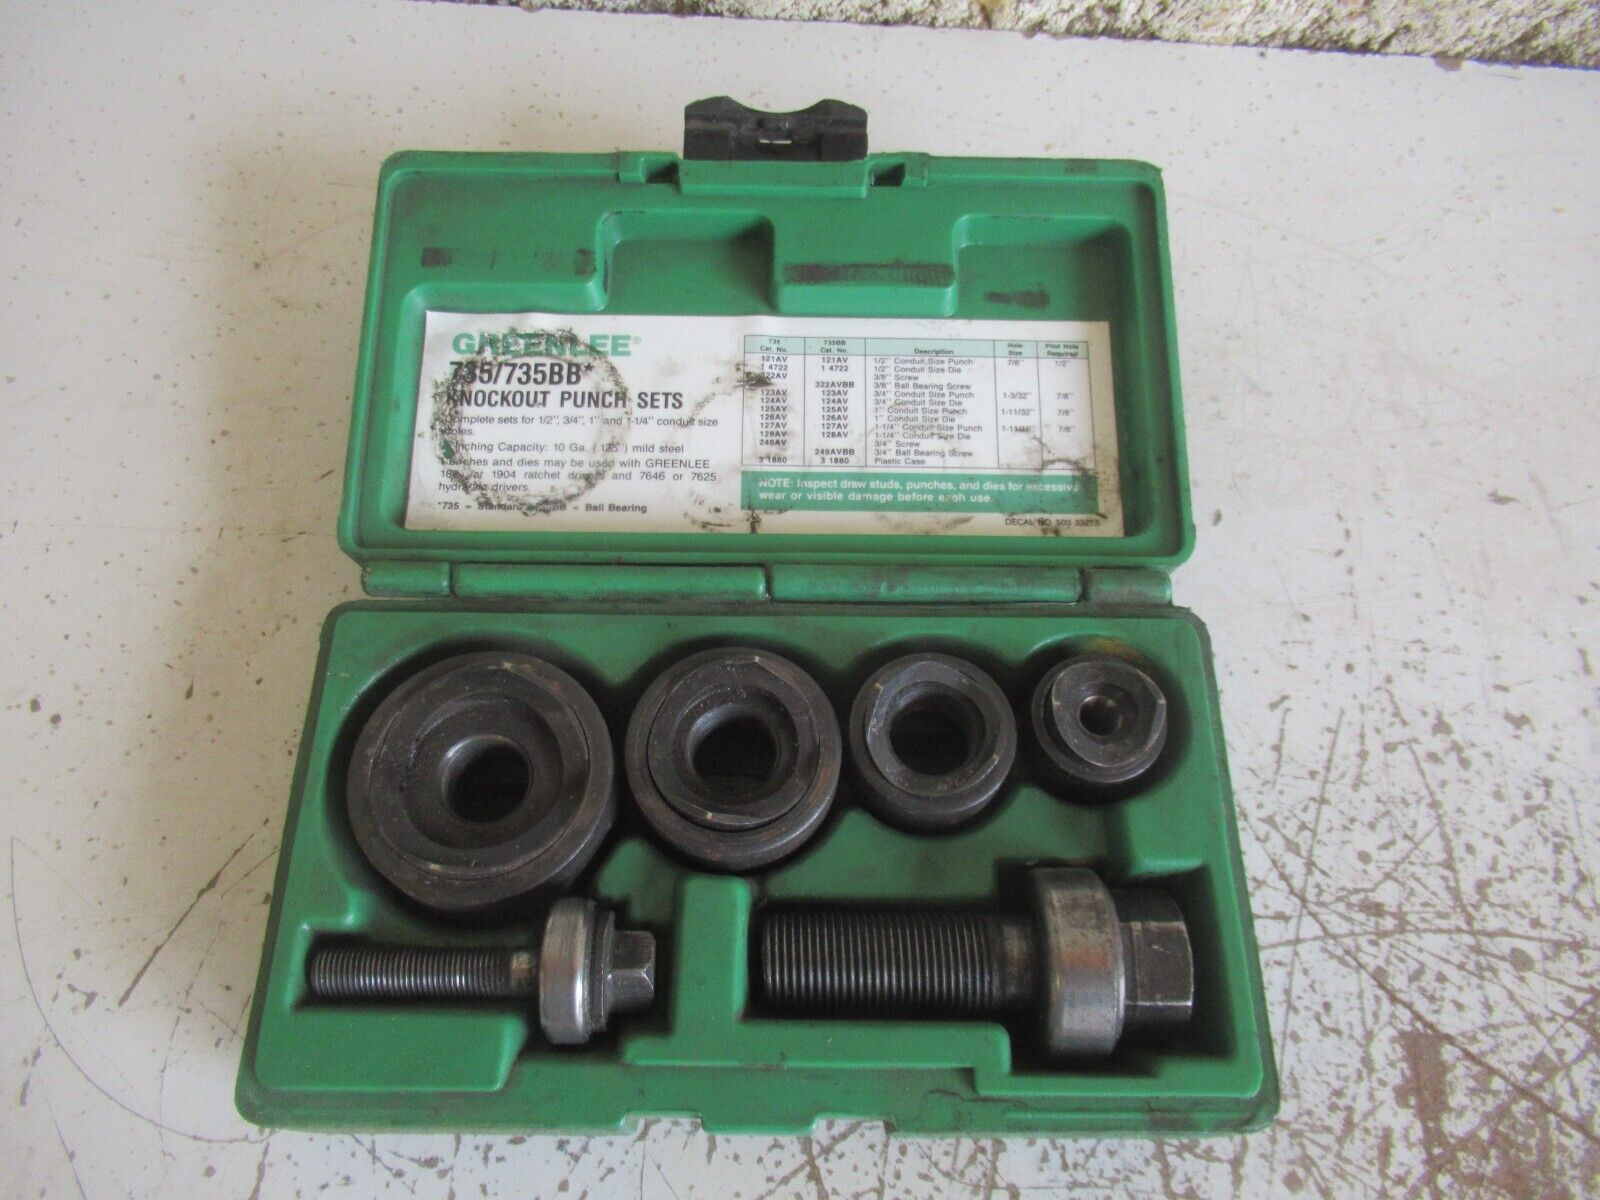 Greenlee Ball Bearing Knockout Punch Set Model 735/735BB in Box Nice Condition